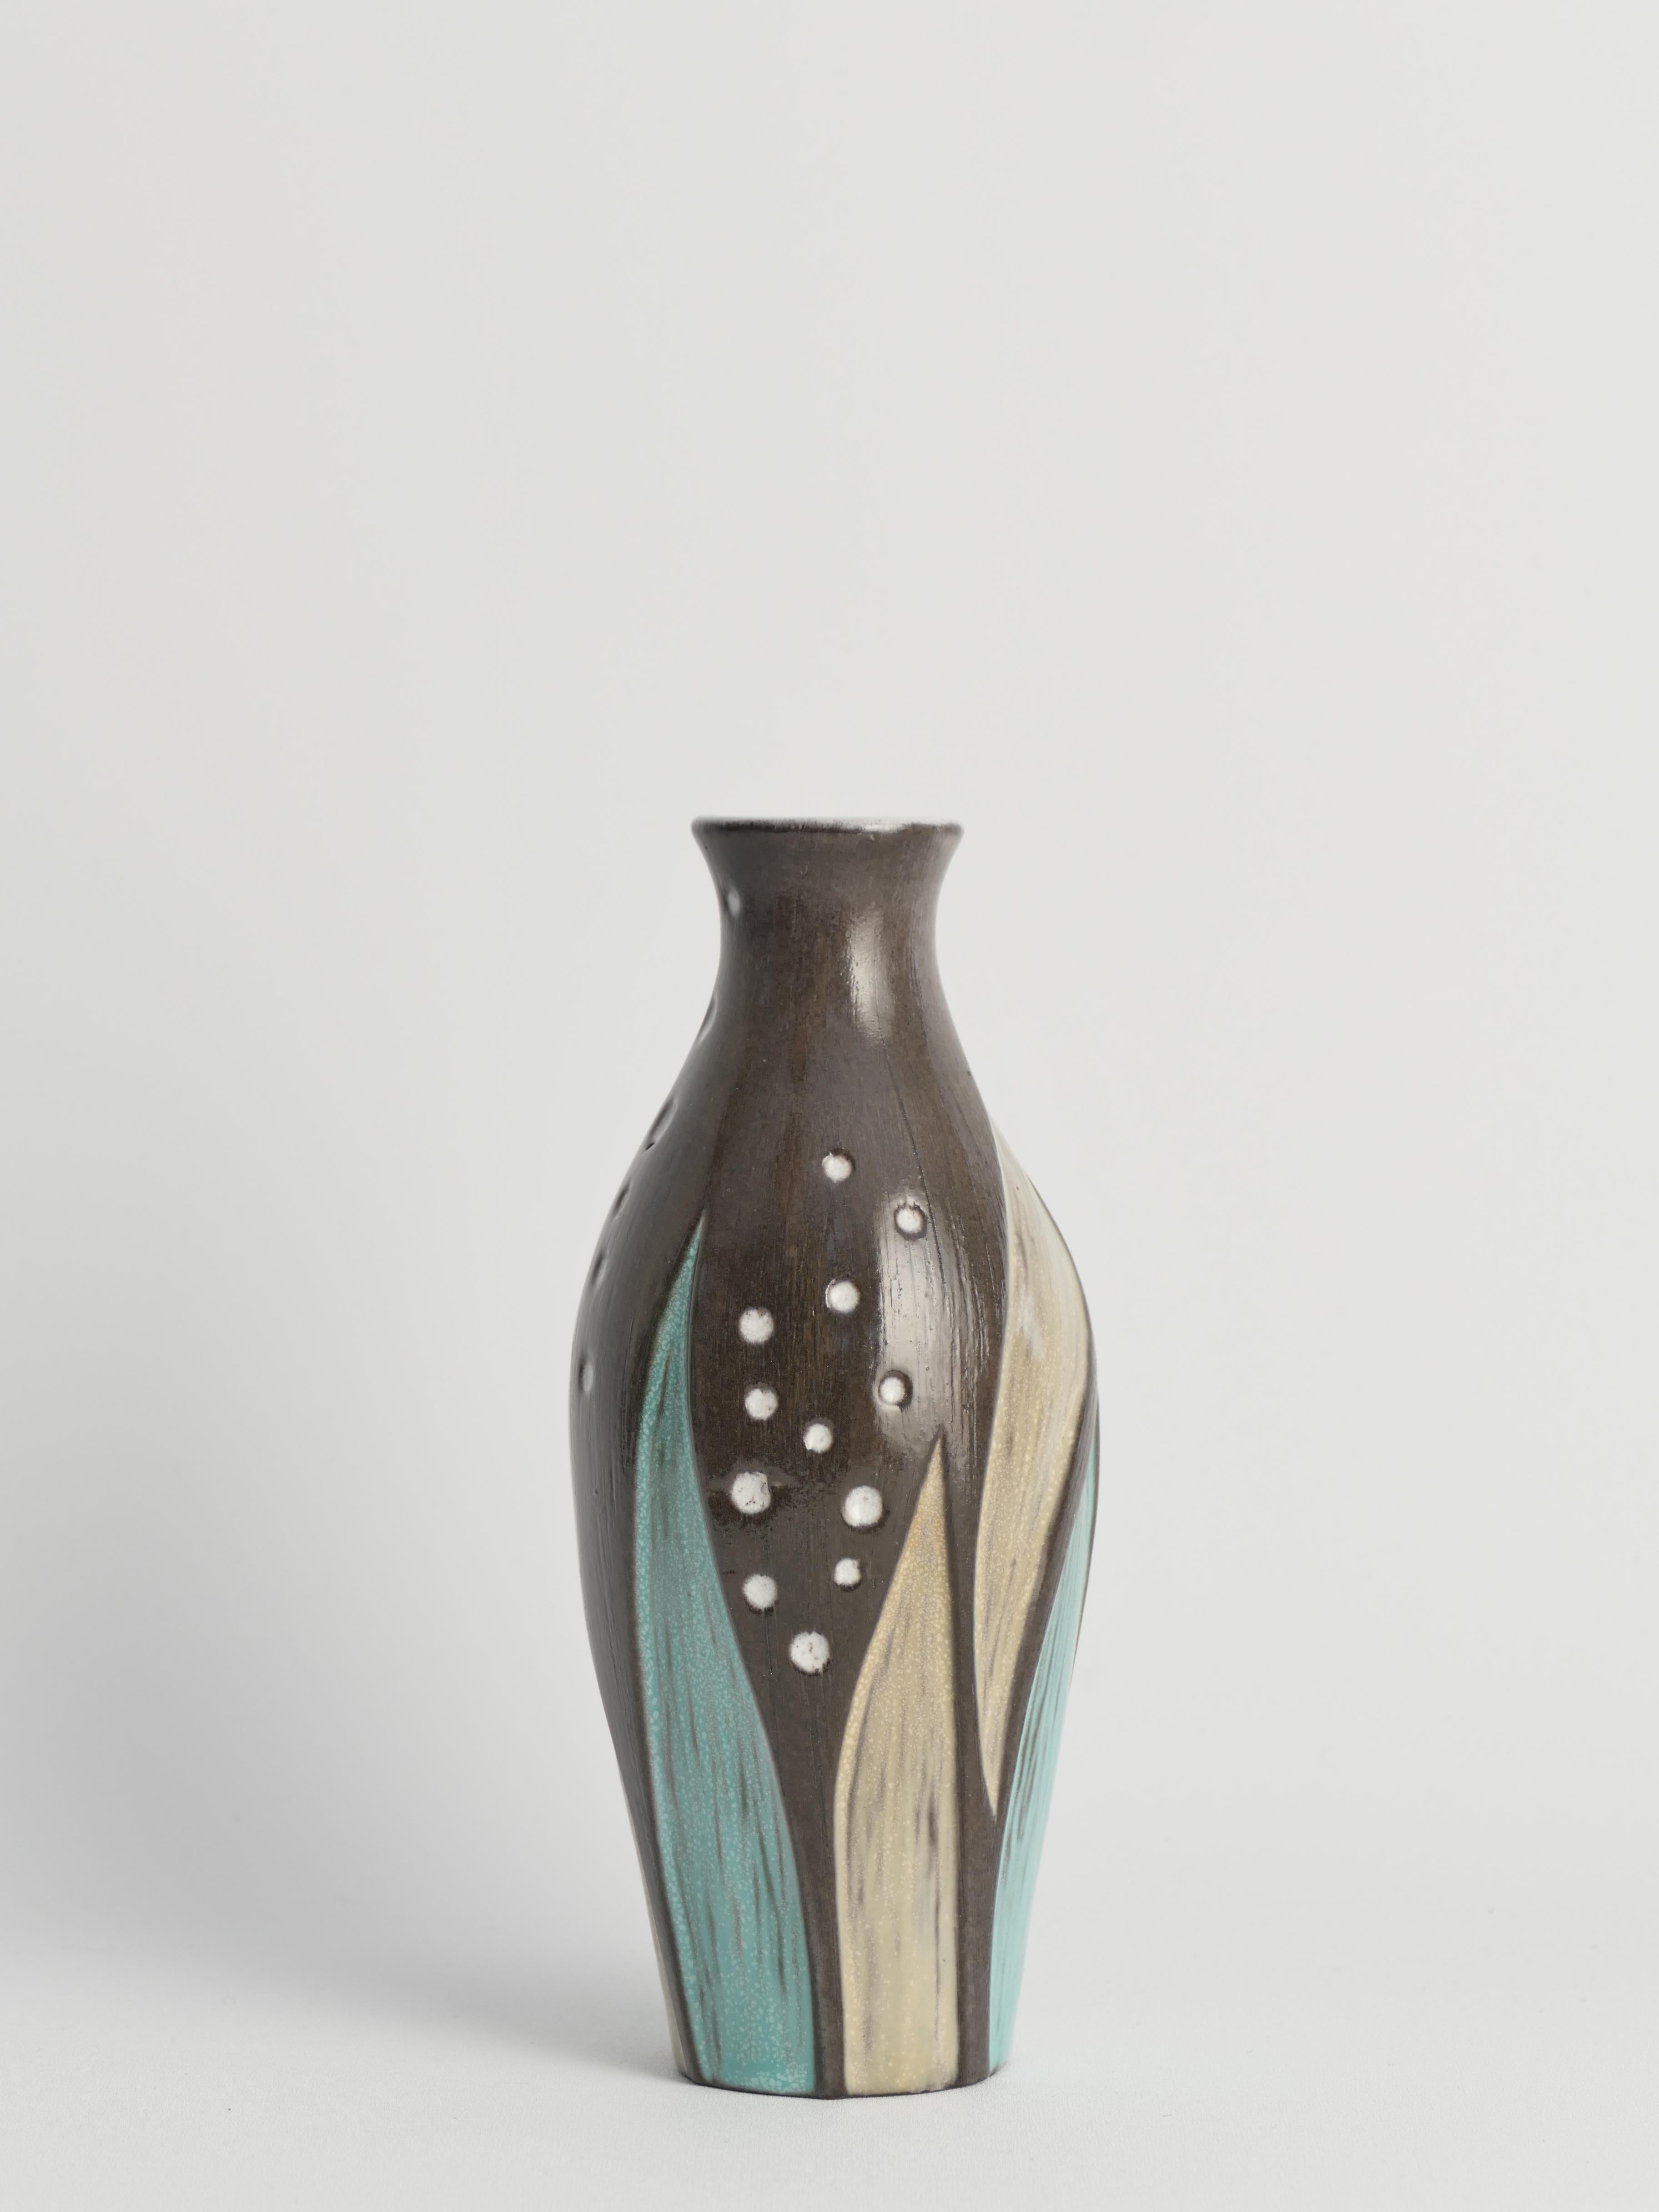 Ceramic Vase with Seaweed Motif by Mari Simmulson for Upsala Ekeby, Sweden 1950s In Good Condition For Sale In Grythyttan, SE